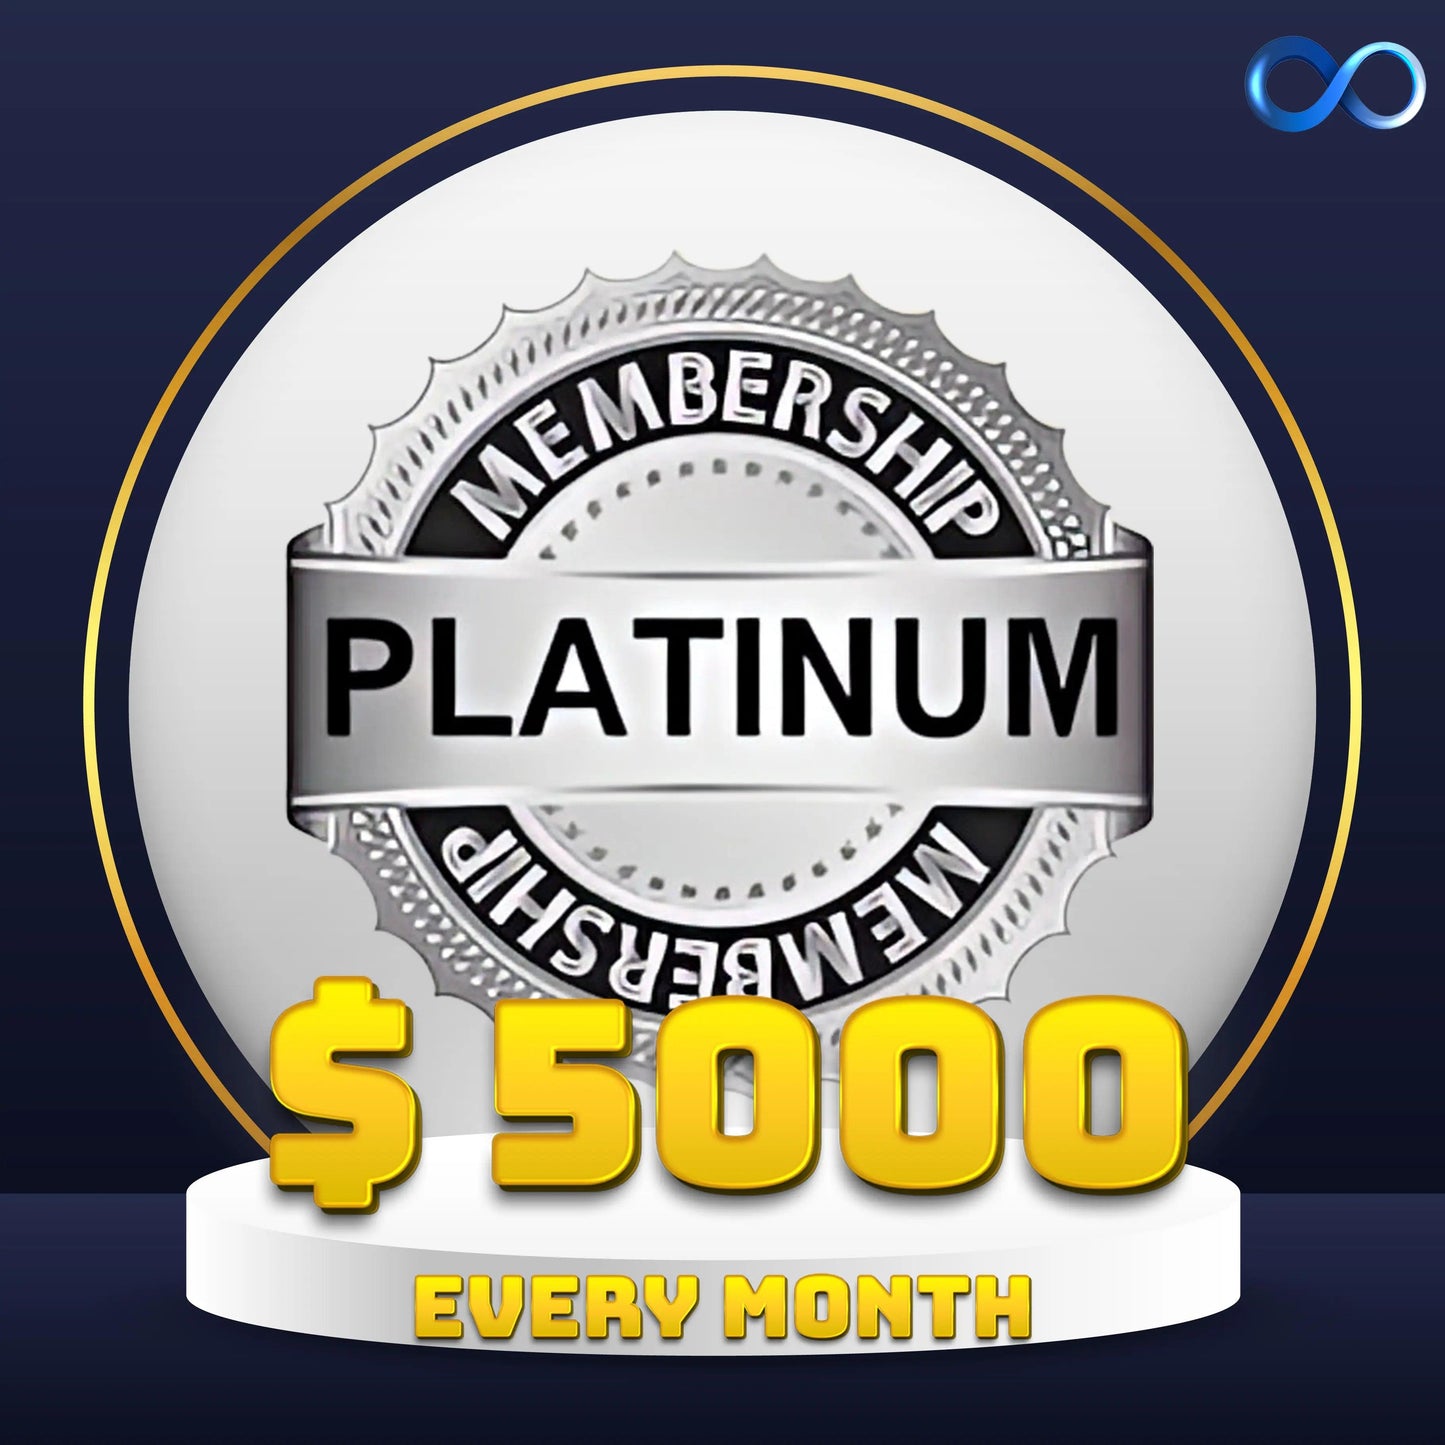 Platinum Investment Package Monthly revenue: $ 5 000 every month / for life time